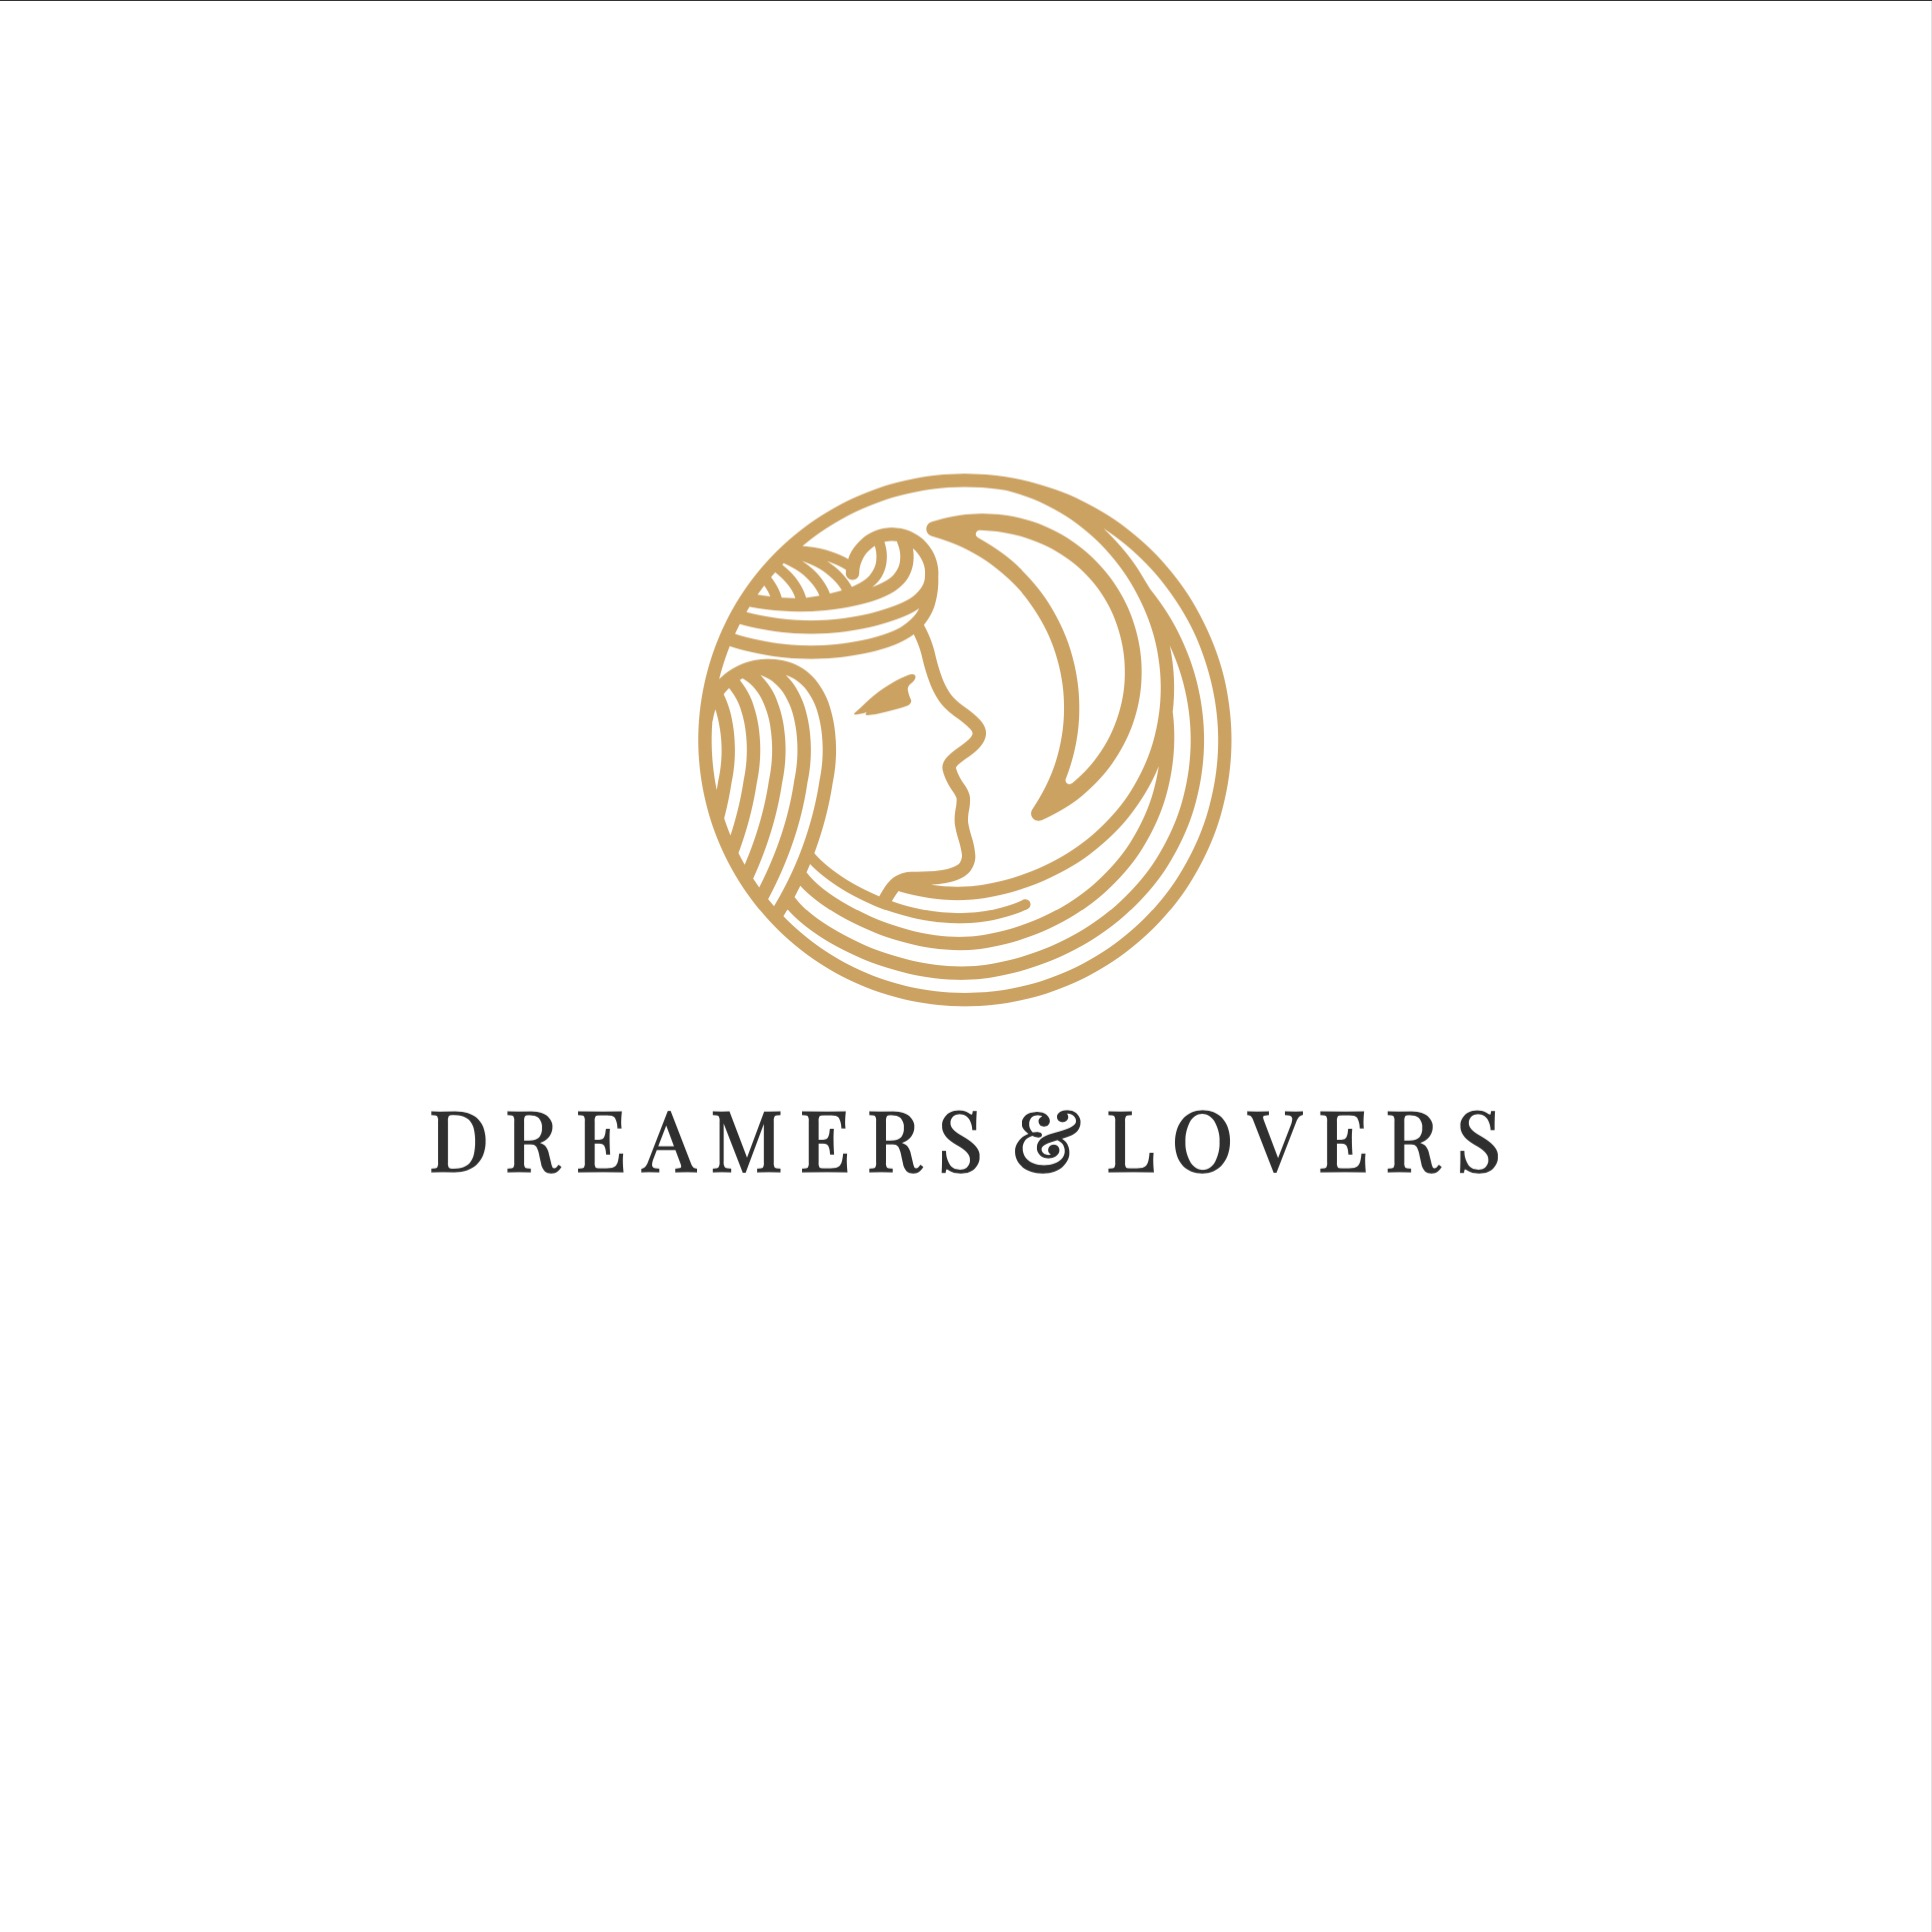 Dreamers & Lovers - Torrance Showroom - Torrance, CA 90505 - (424)448-2161 | ShowMeLocal.com